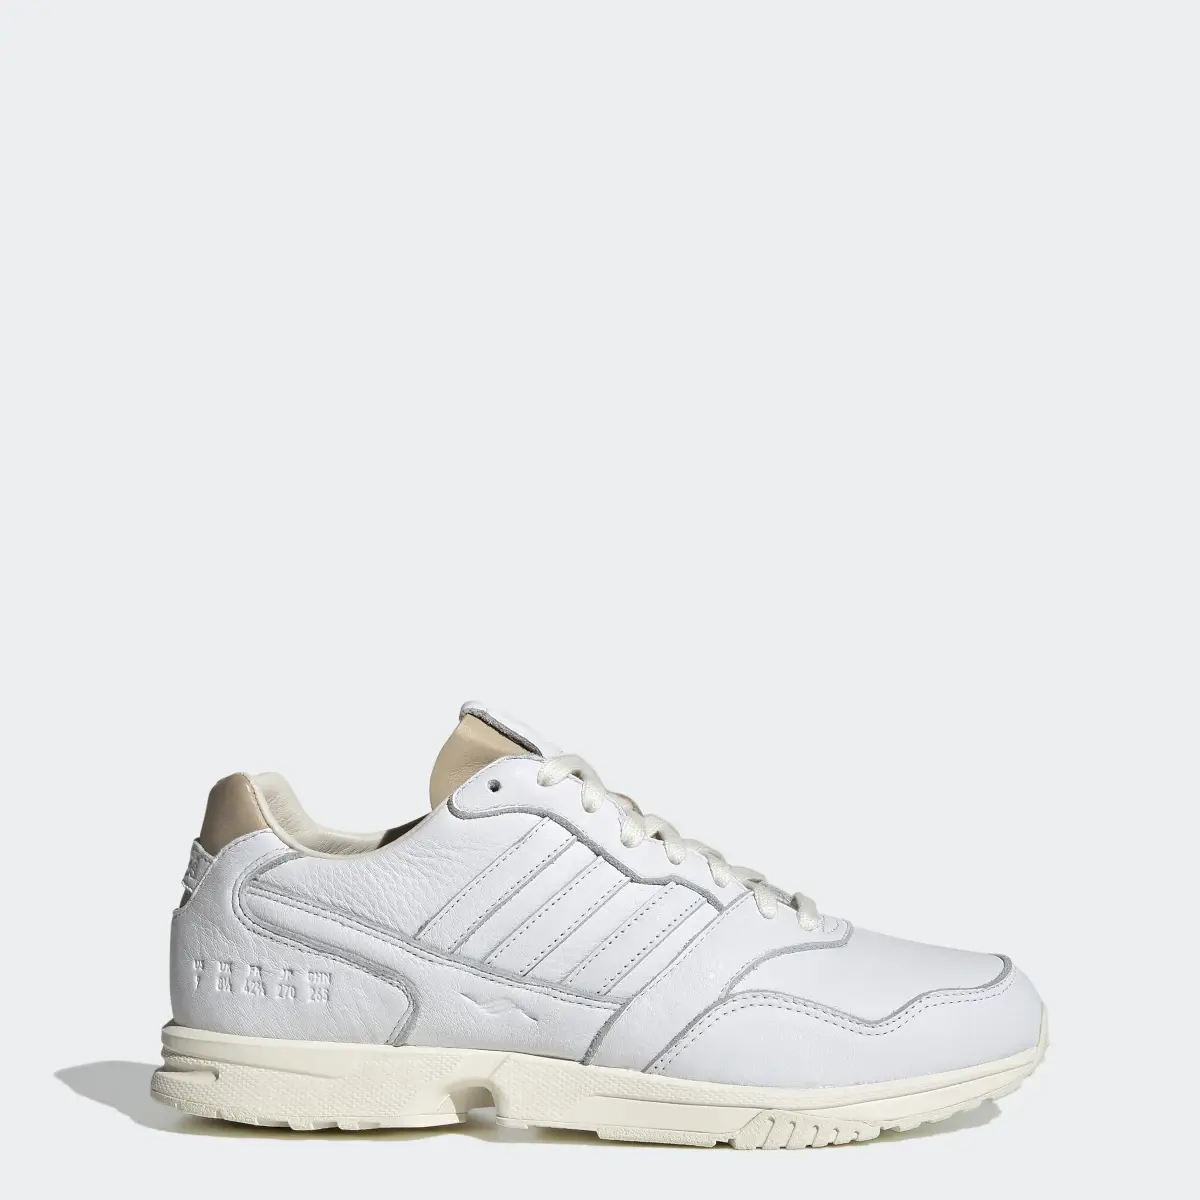 Adidas ZX 1000 Shoes. 1